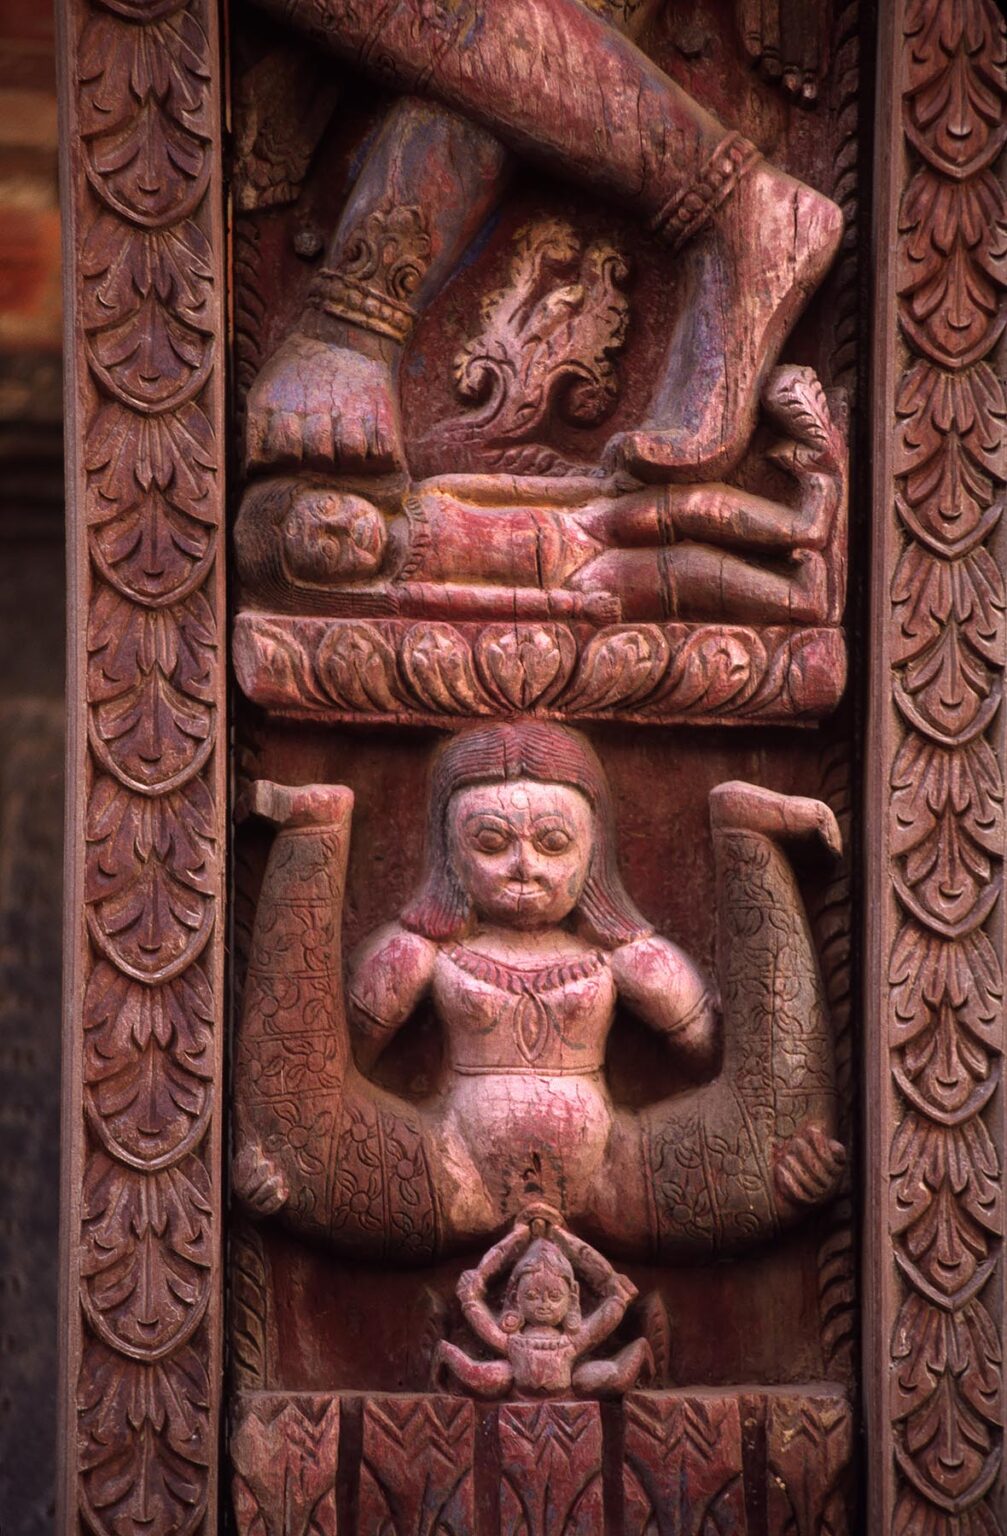 TANTRIC CARVINGS showing birth on ancient temple struts - BHAKTAPUR, NEPAL